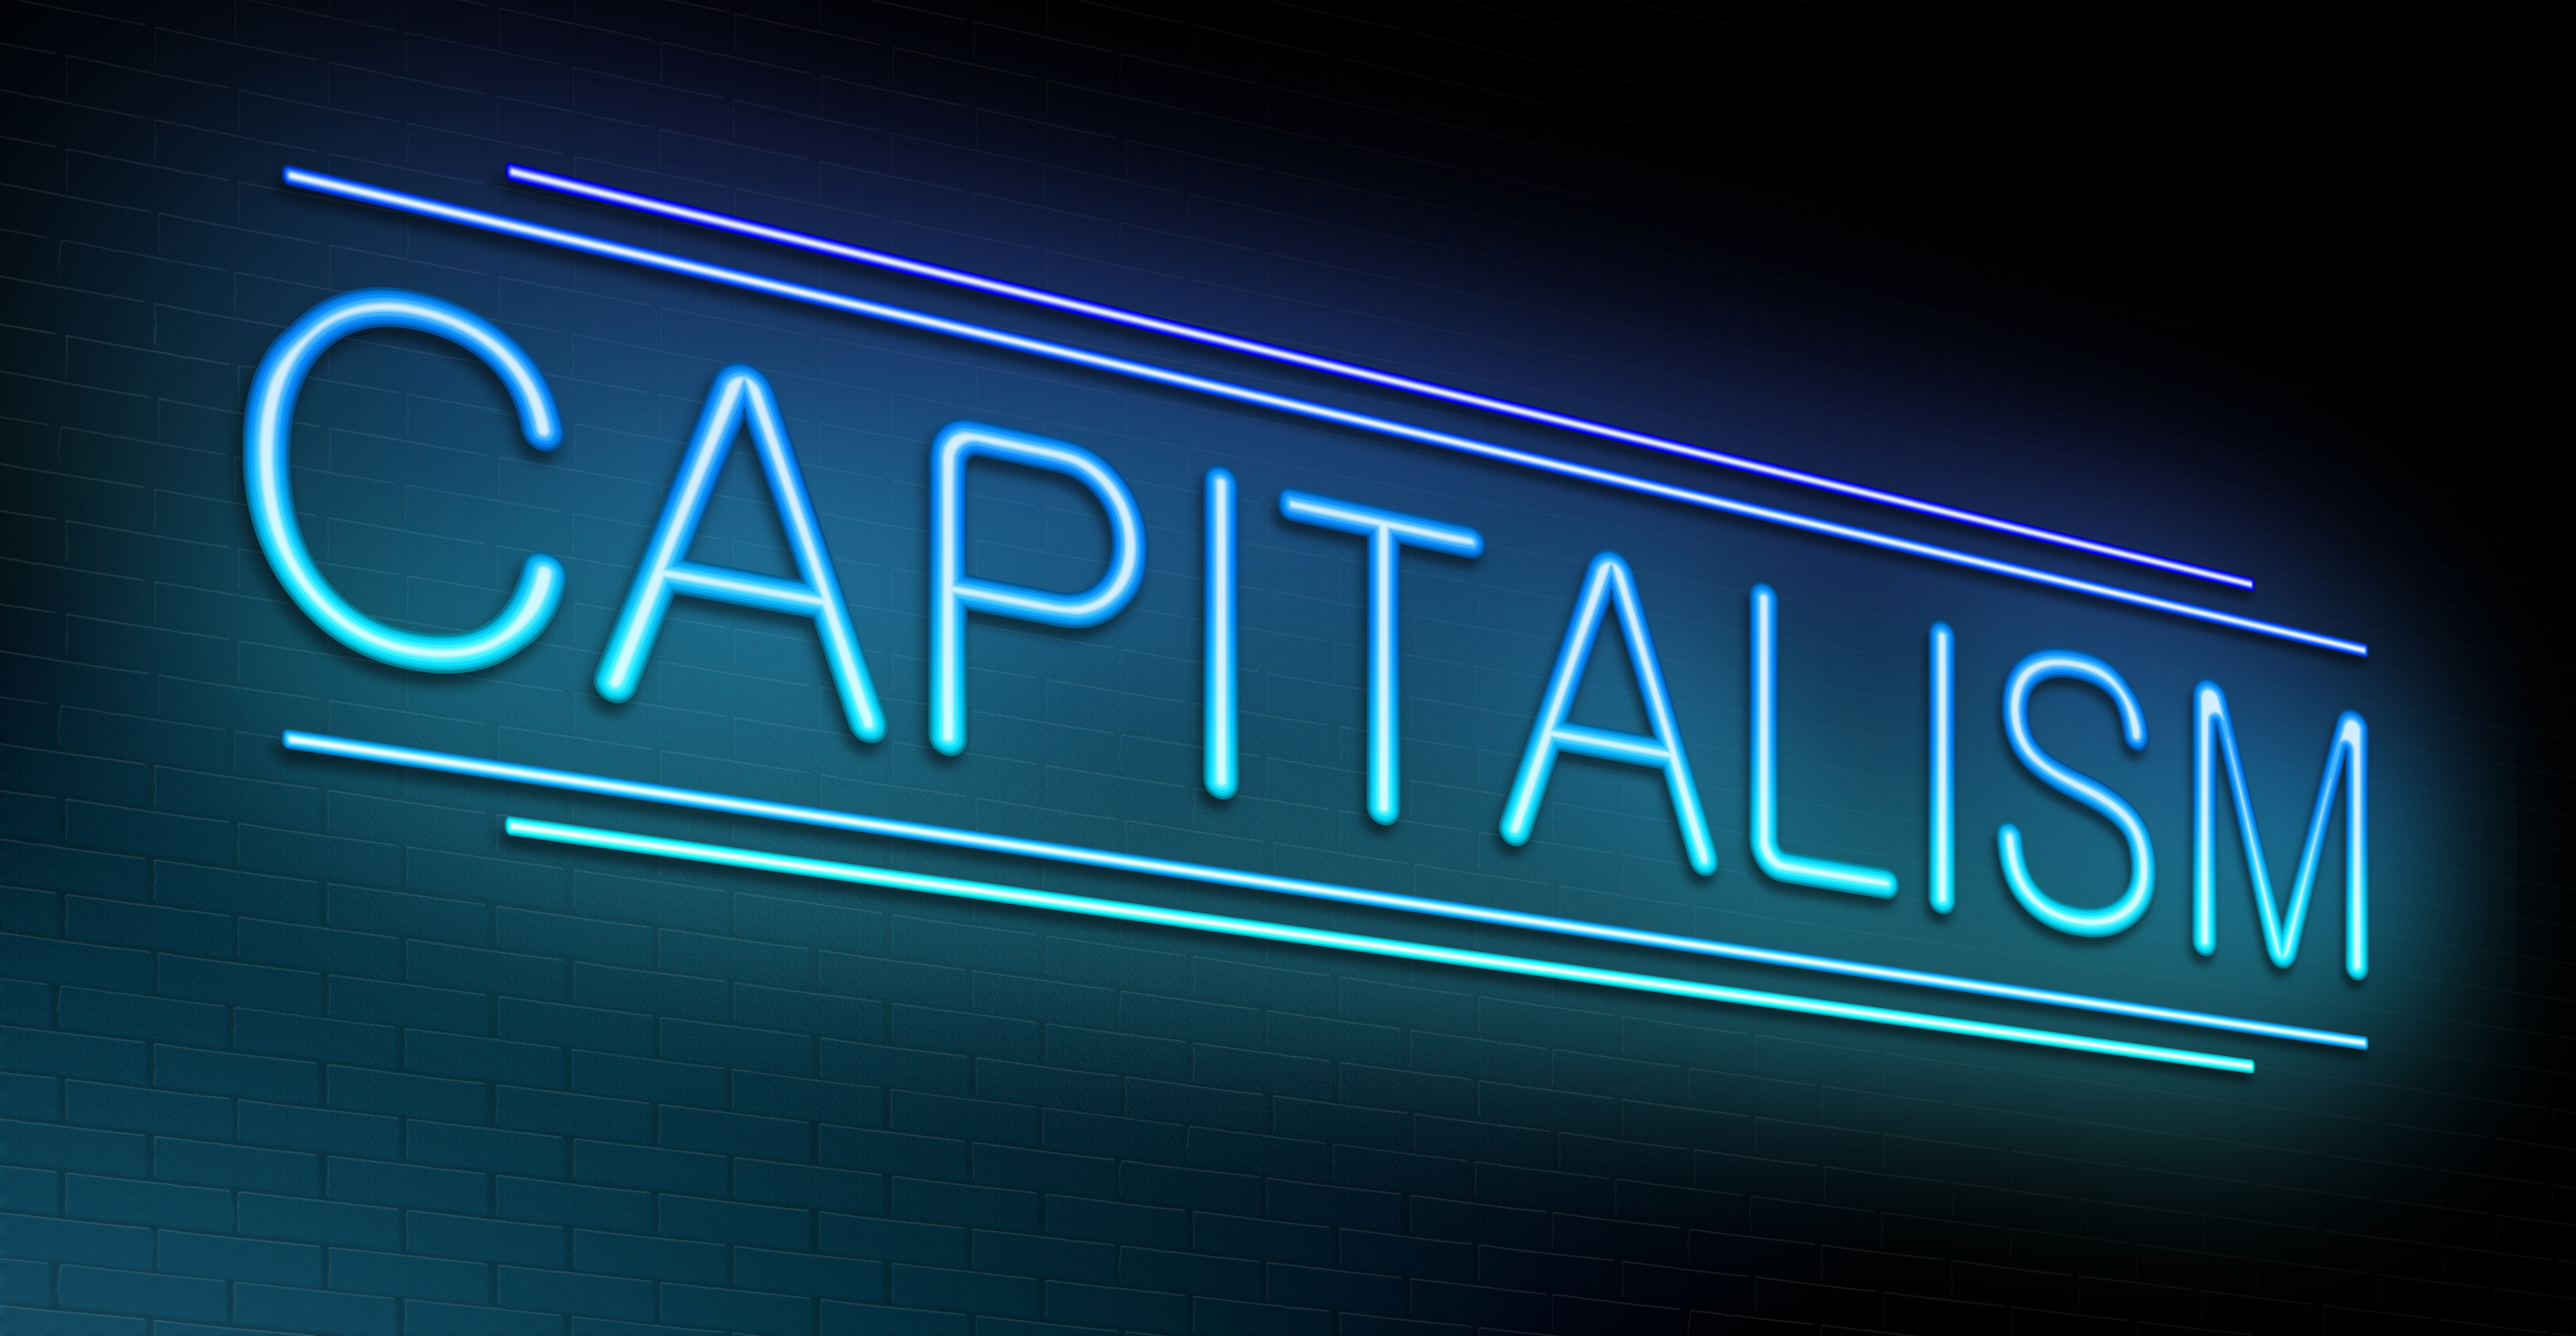 Capitalism sign in Neon